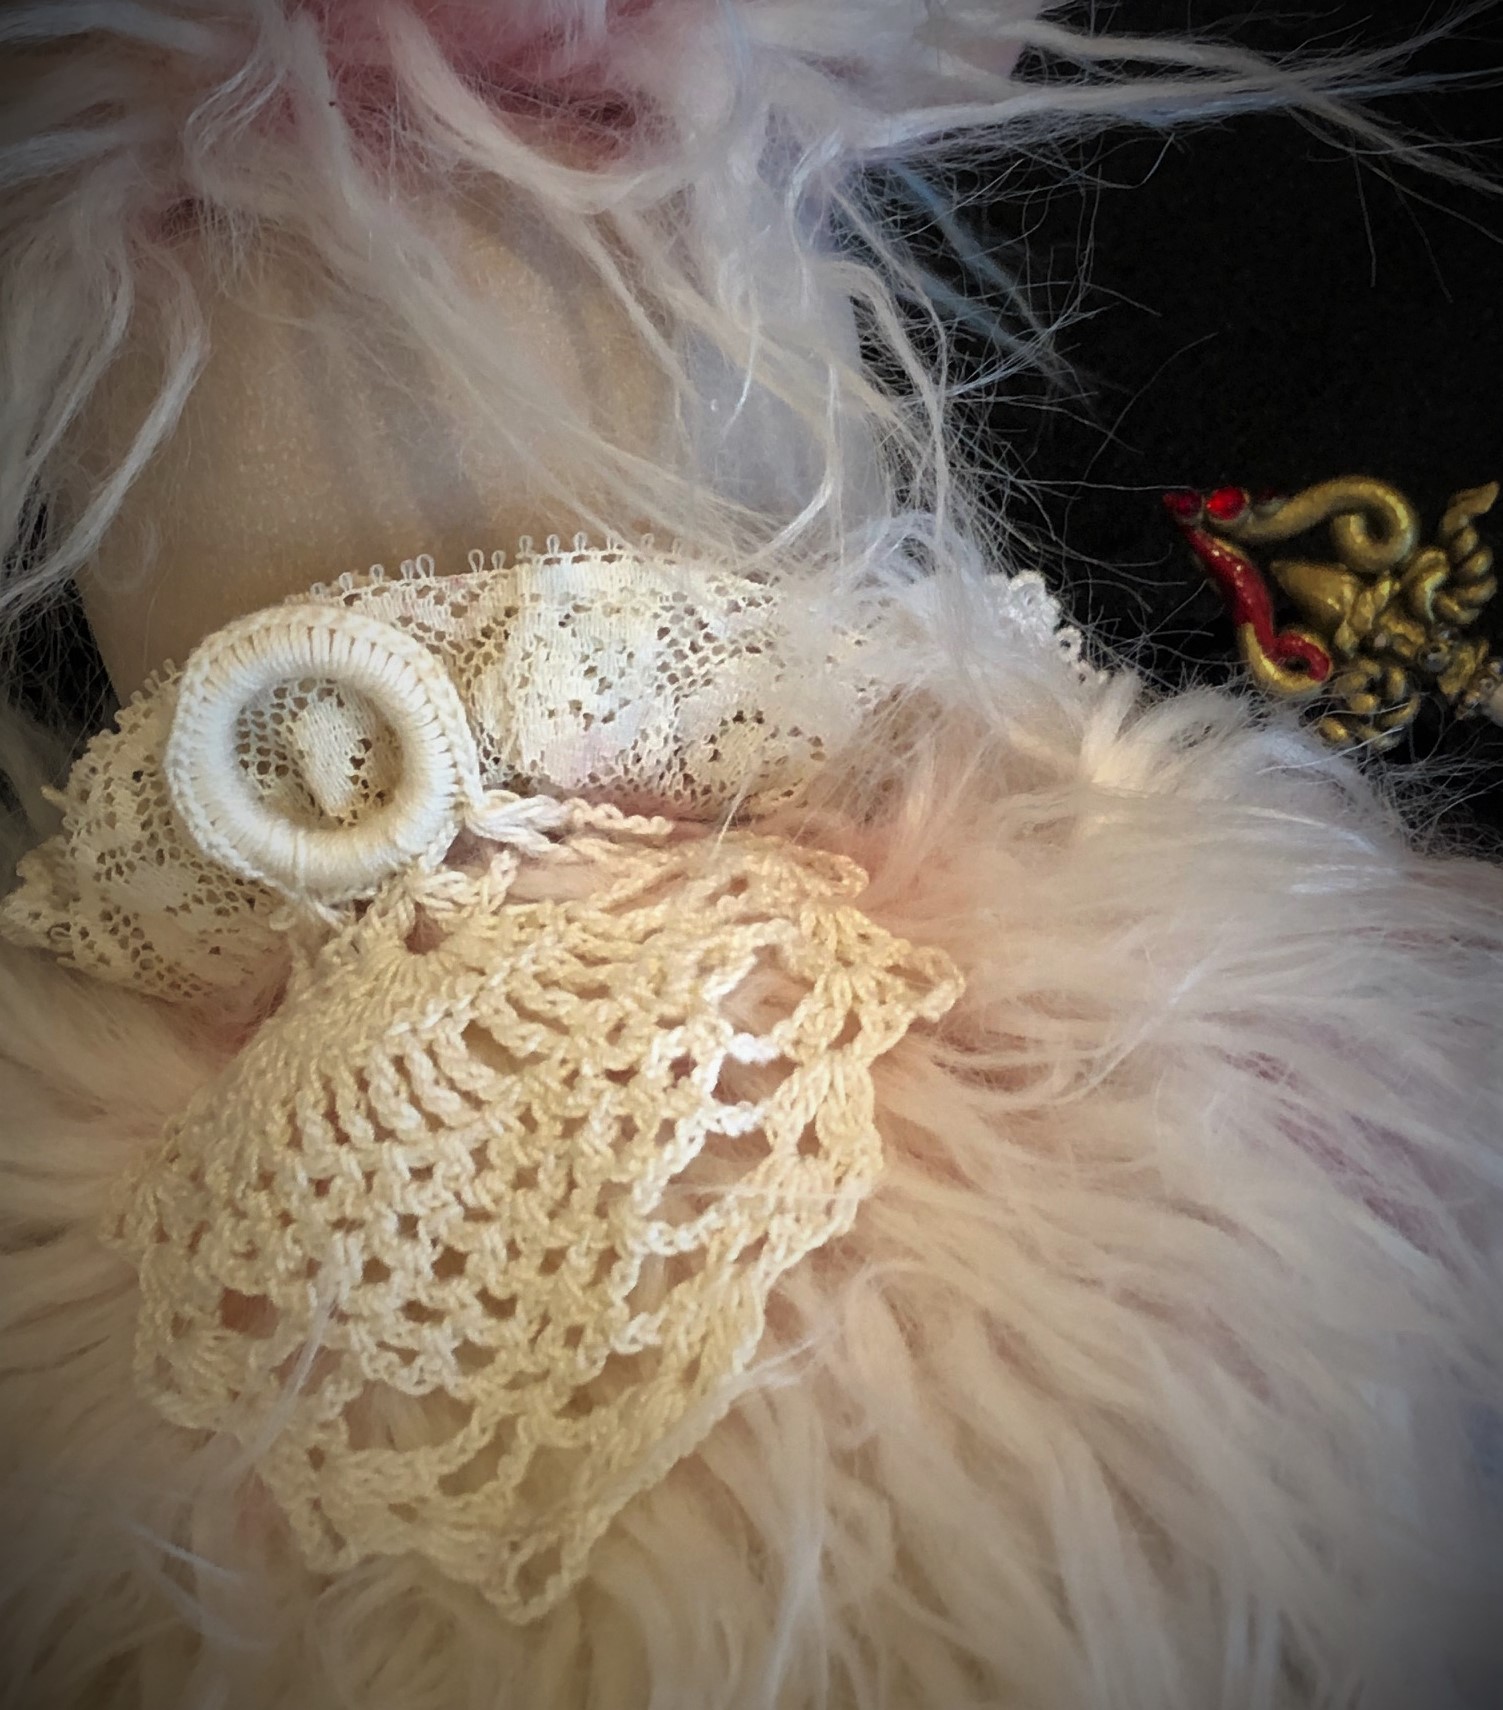 close-up detail of crocheted lace with ring to hang doll up with